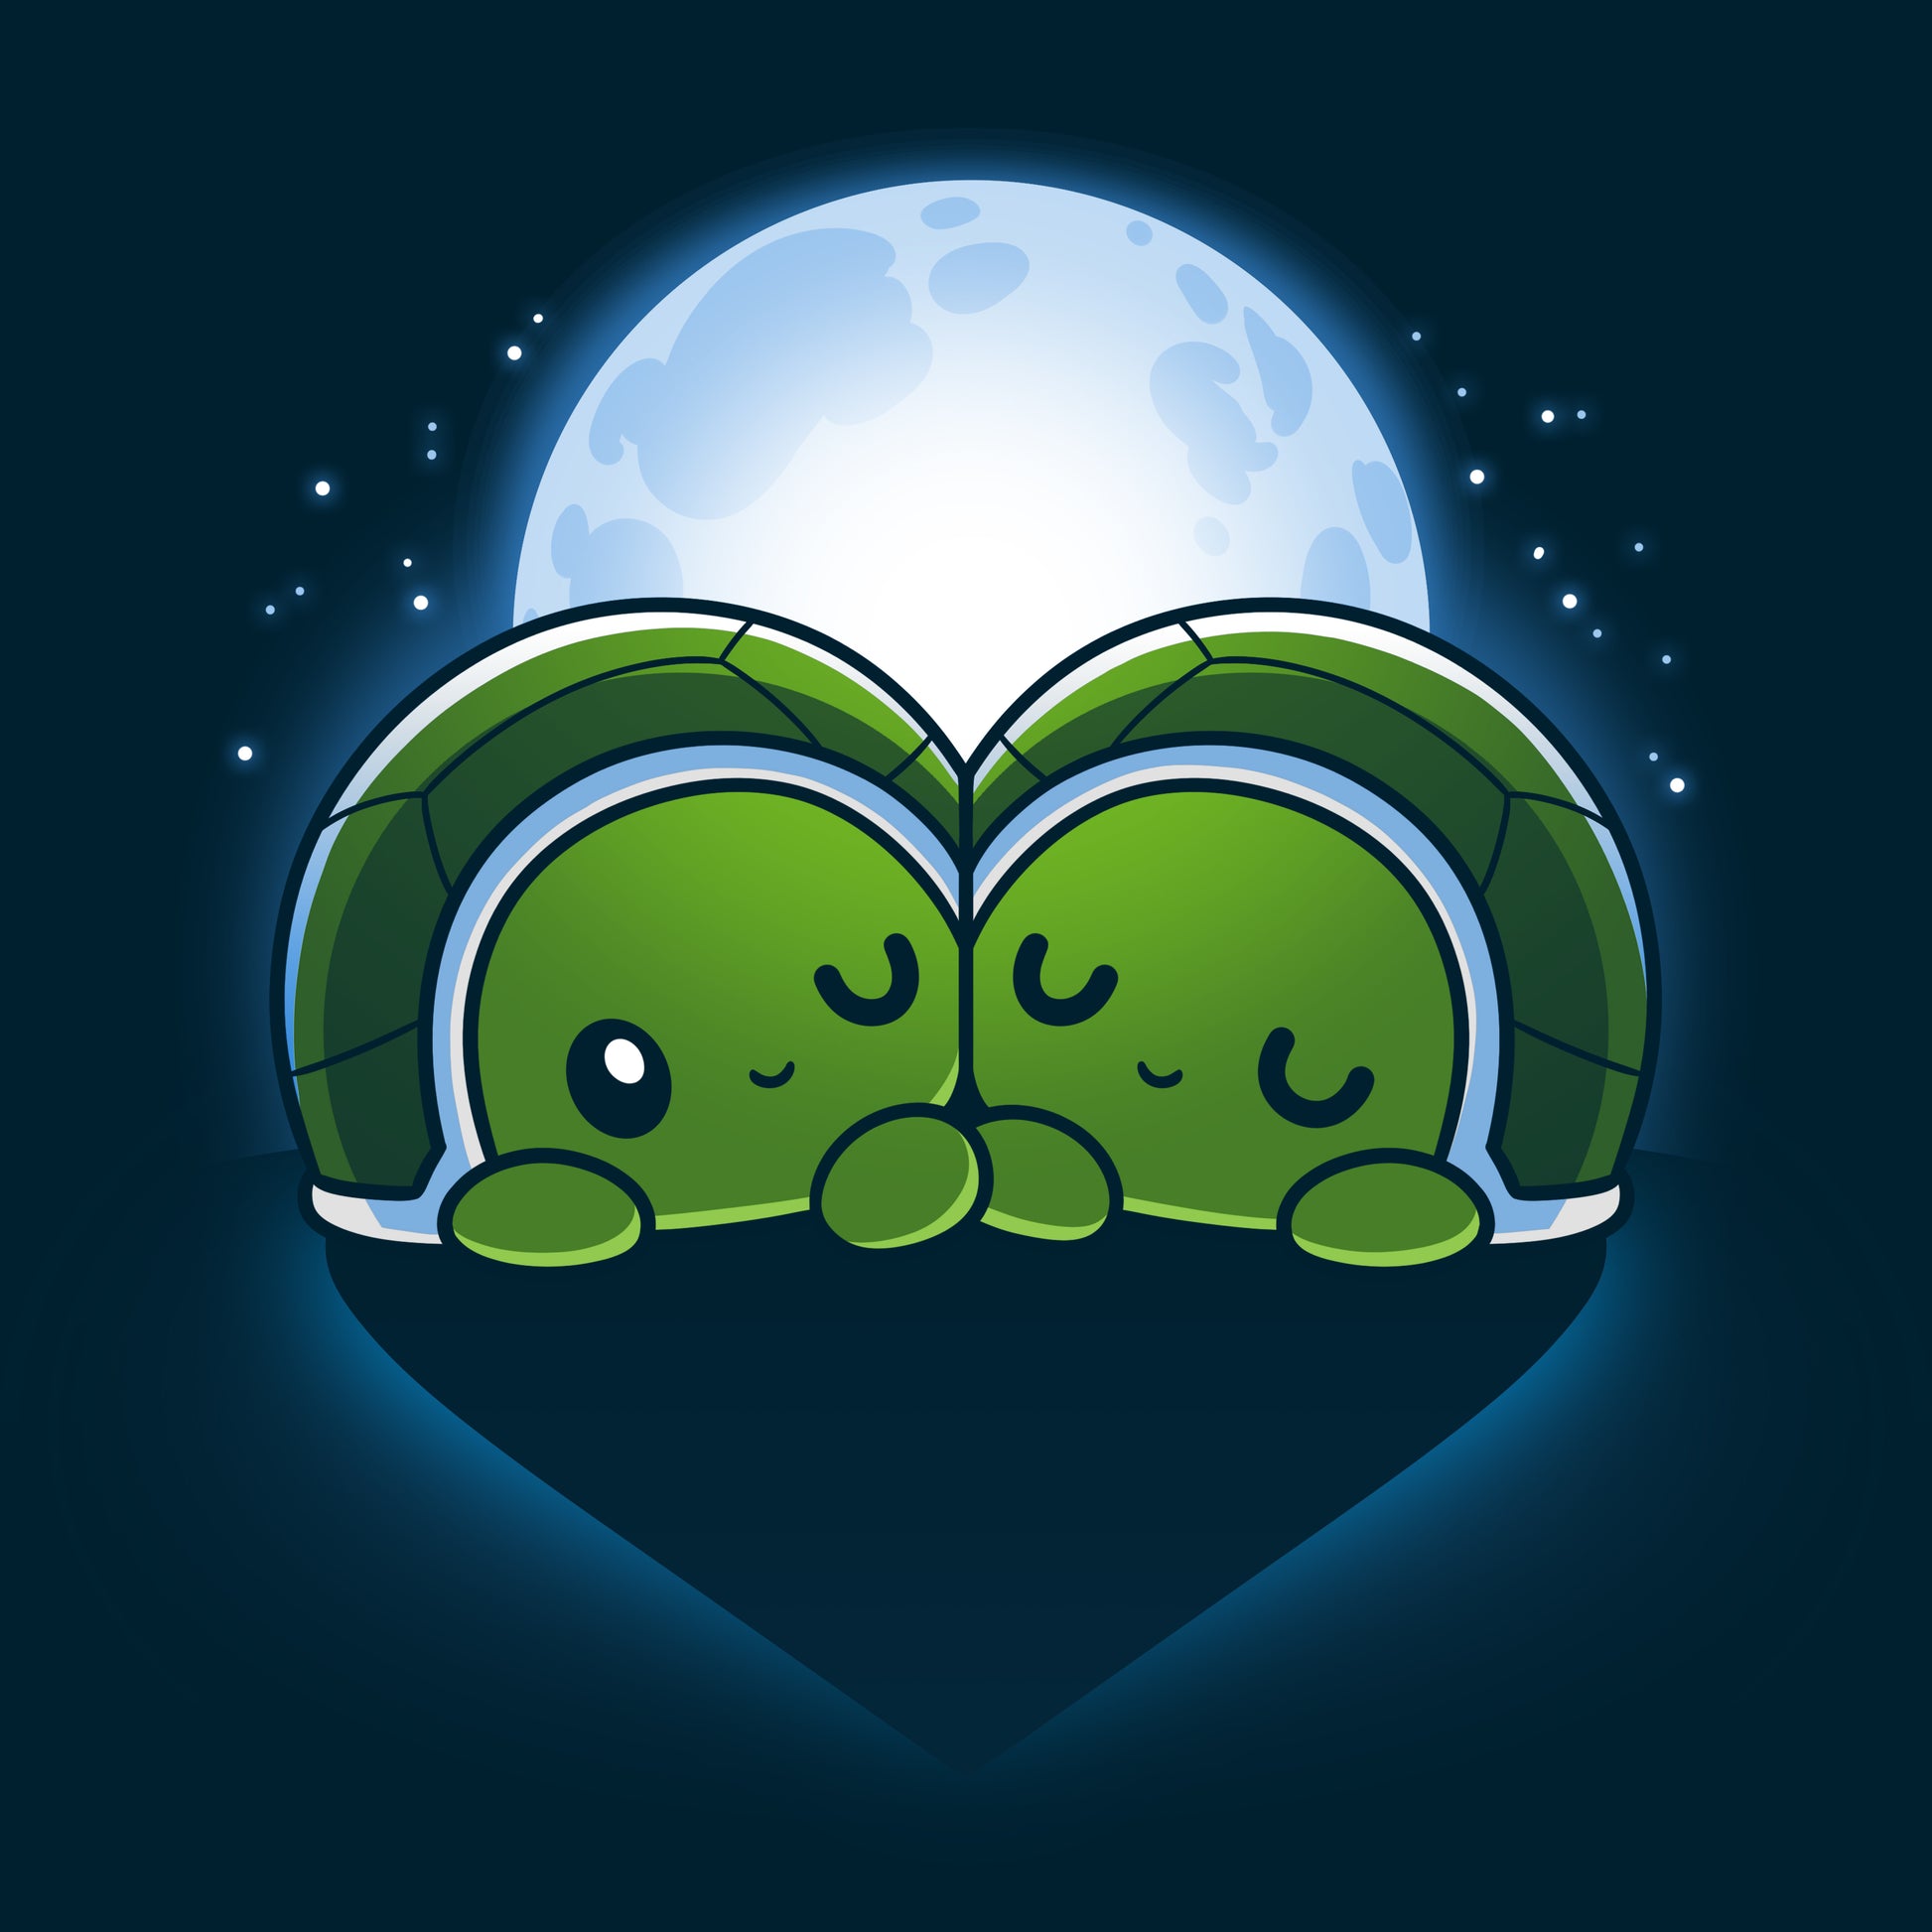 Description: Two turtles hugging in front of the moon on Turtlelly in Love tees made from ringspun cotton, brought to you by TeeTurtle for ultimate comfort.